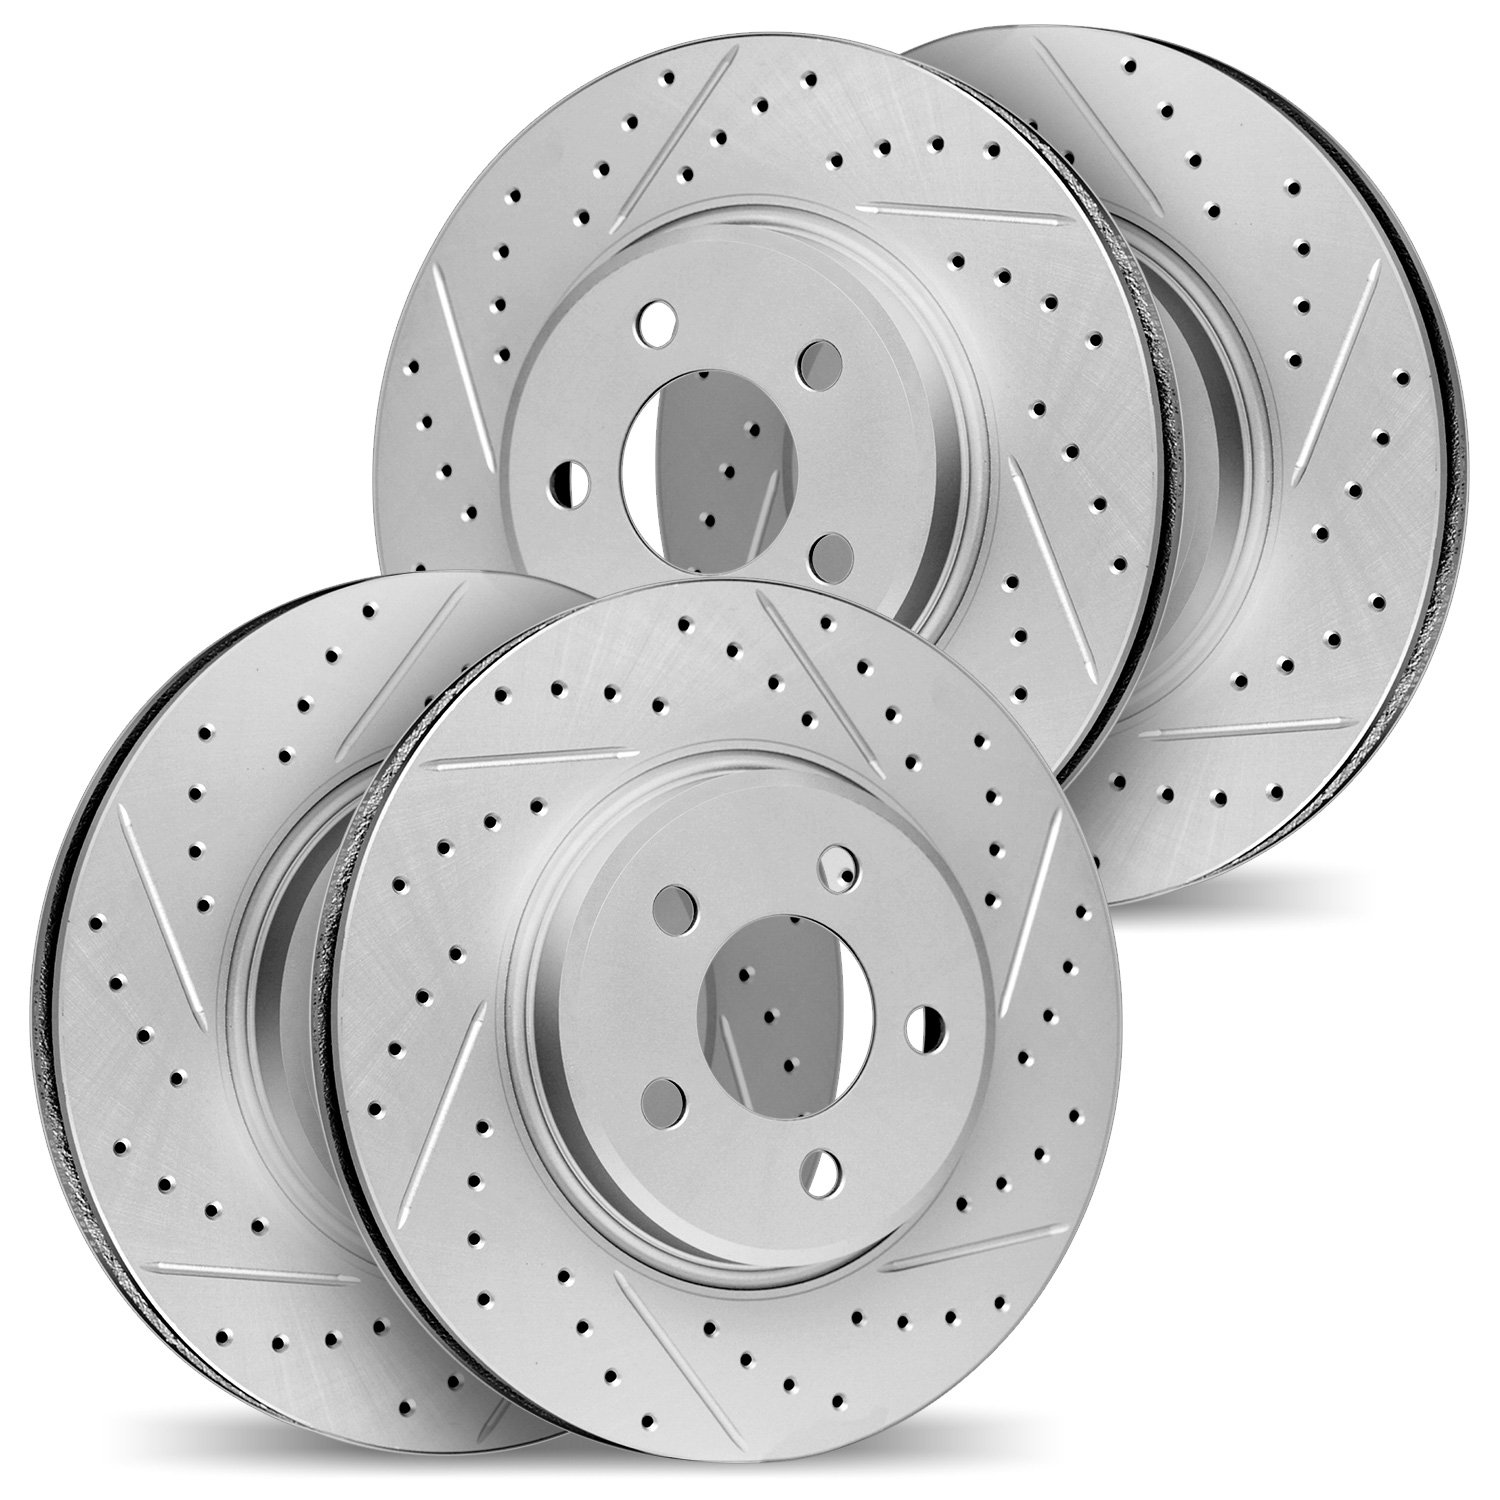 2004-75011 Geoperformance Drilled/Slotted Brake Rotors, 2014-2020 Lexus/Toyota/Scion, Position: Front and Rear